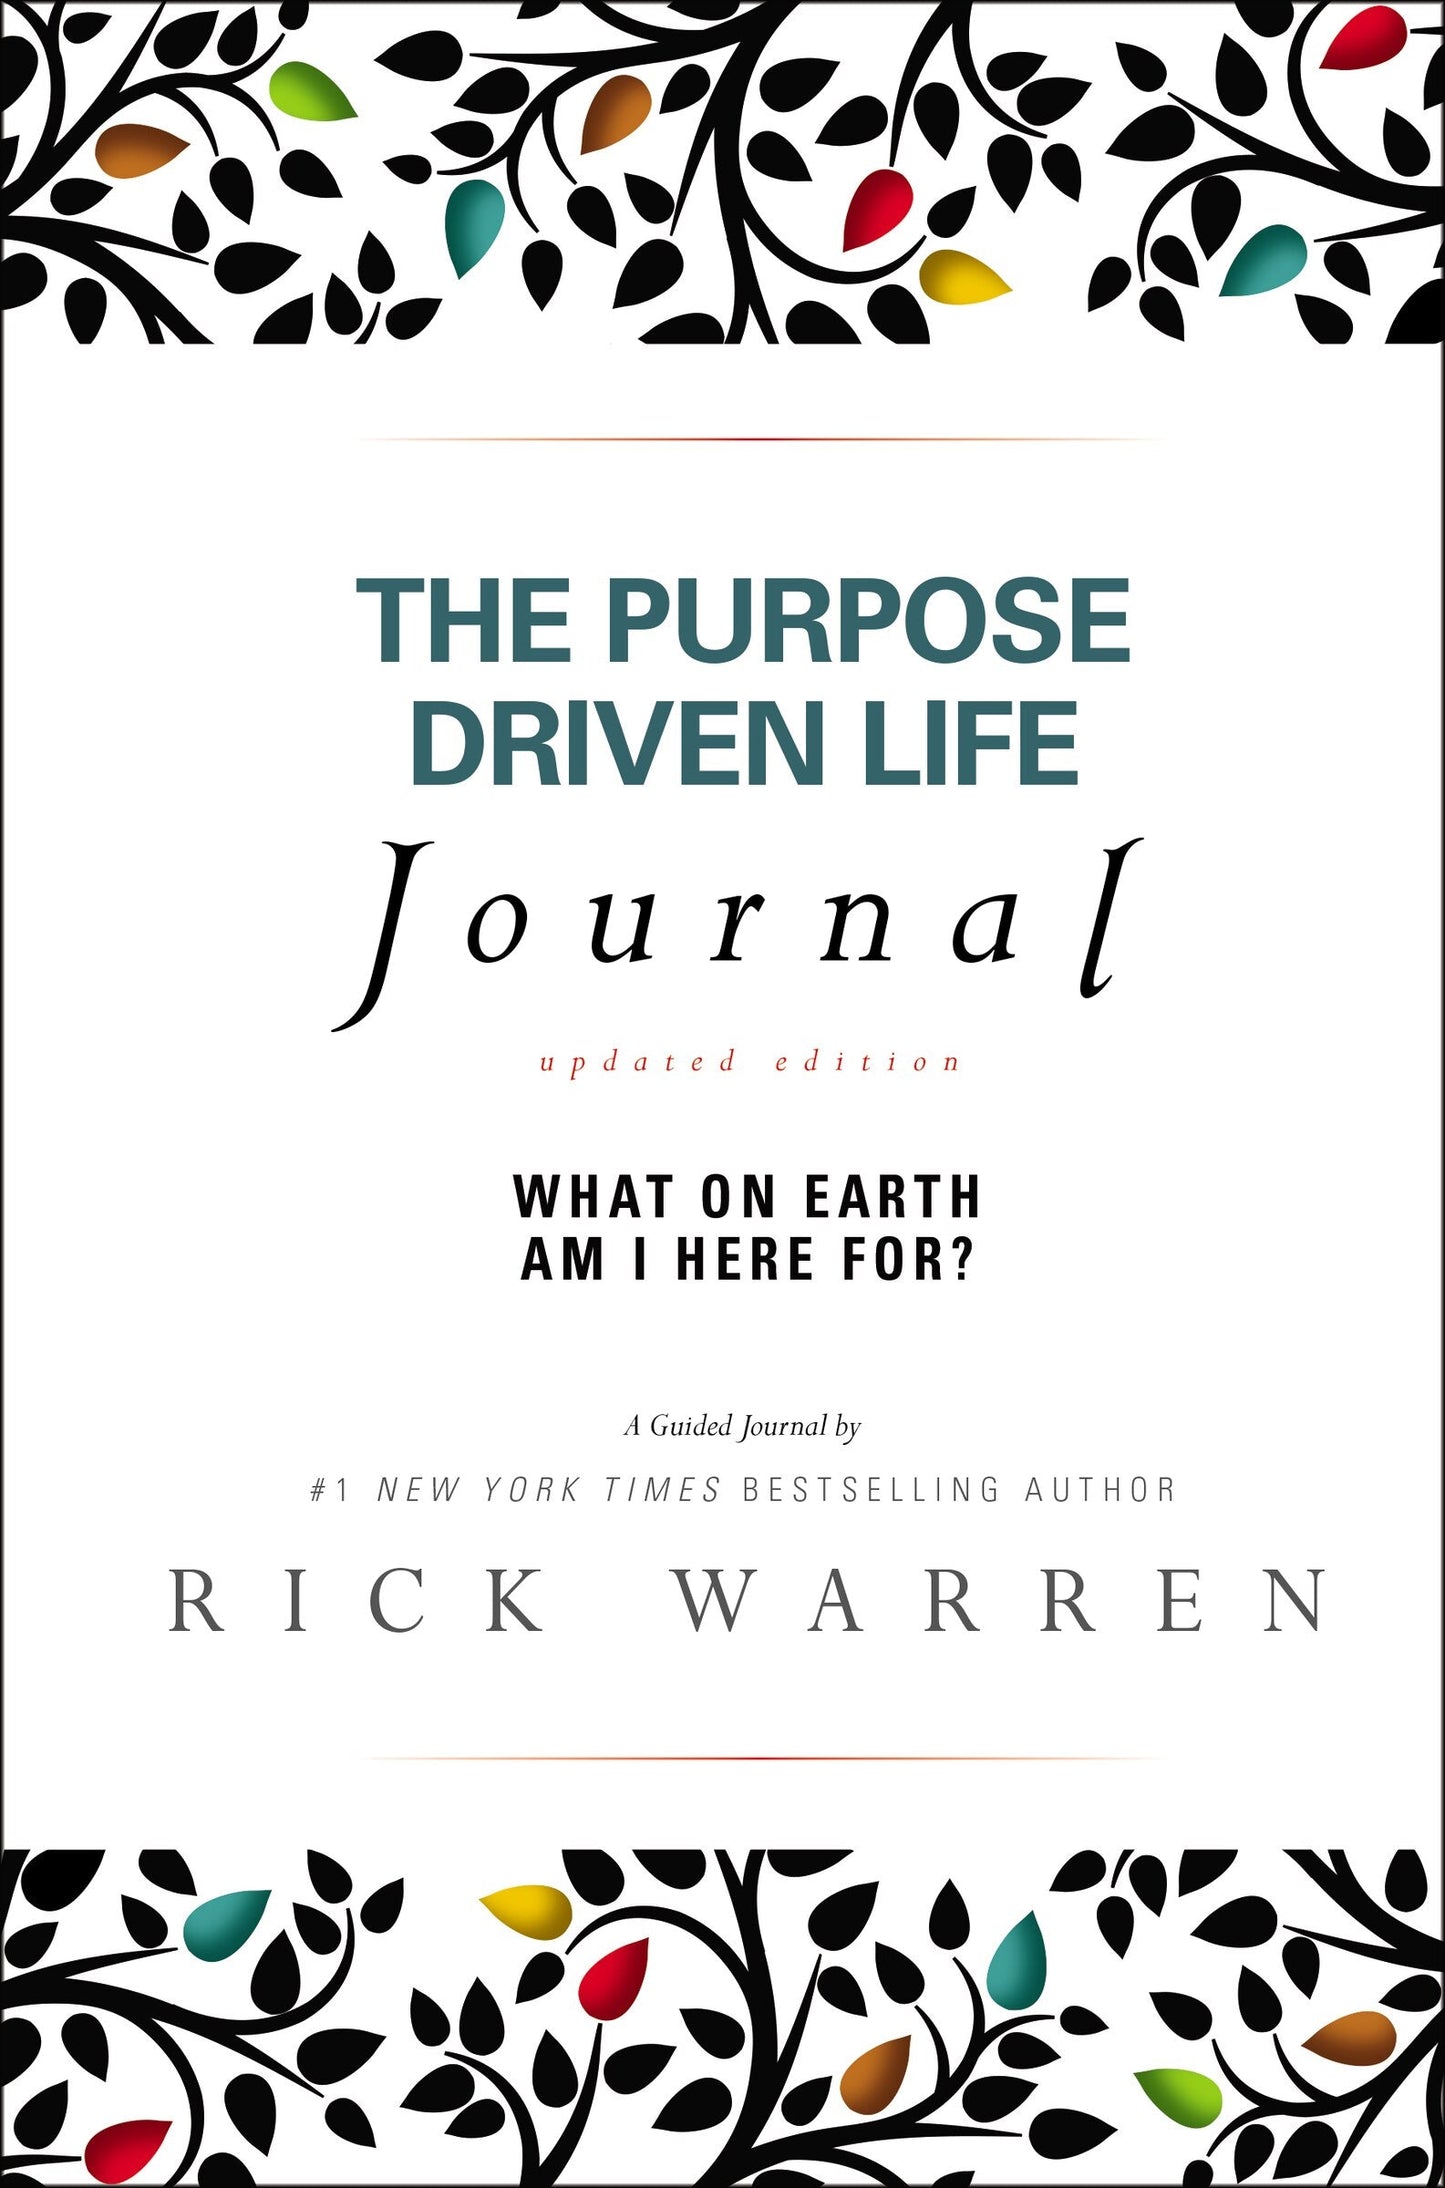 The Purpose Driven Life Journal: What on Earth Am I Here For? - Warren, Rick (Hardcover)-Religion - Inspirational/Spirituality-9780310337232-BookBizCanada